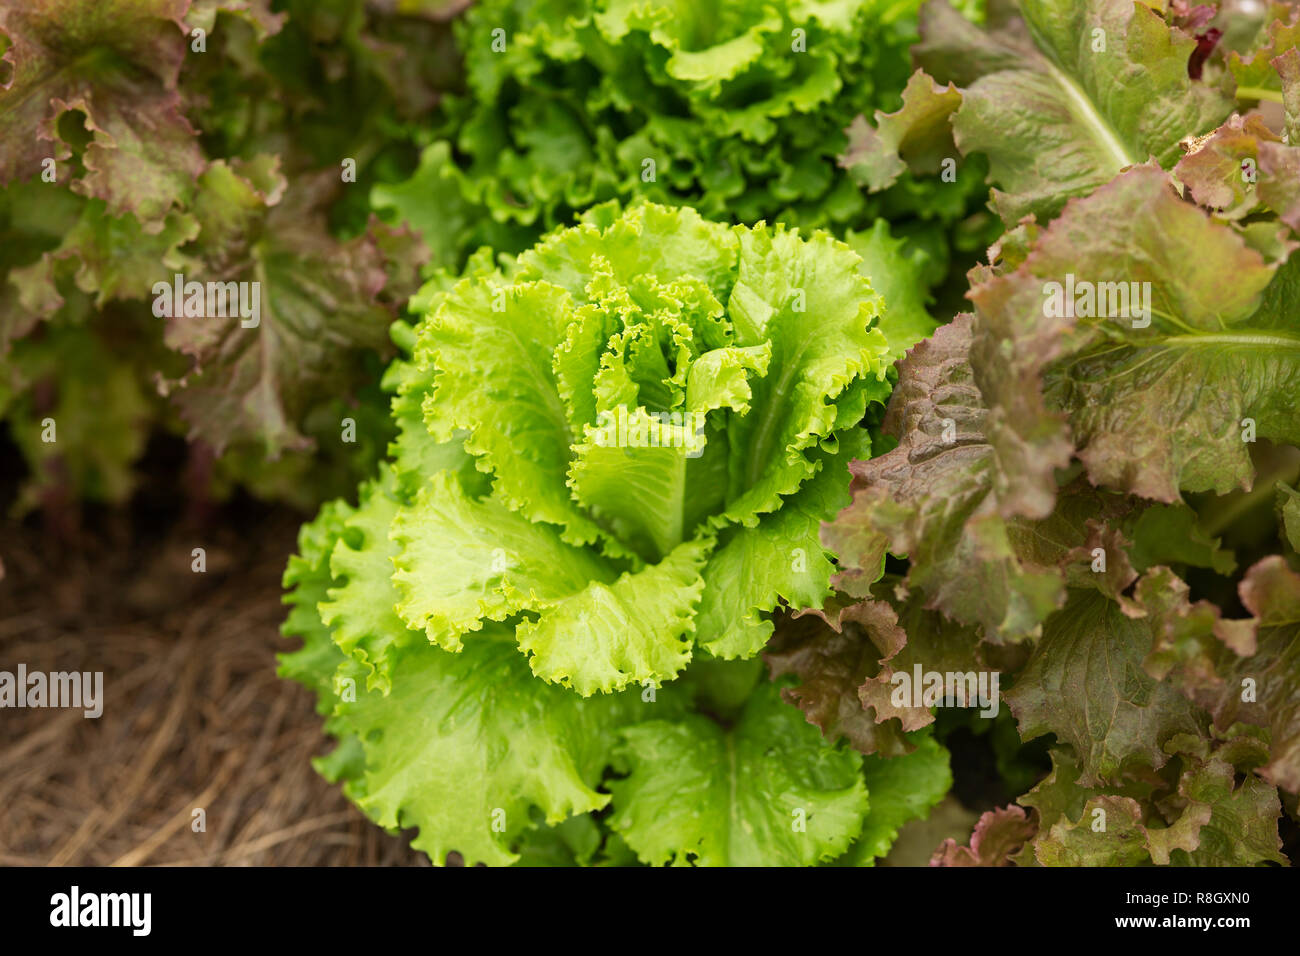 A head of green leaf lettuce (Lactuca sativa) growing in a community garden. Stock Photo